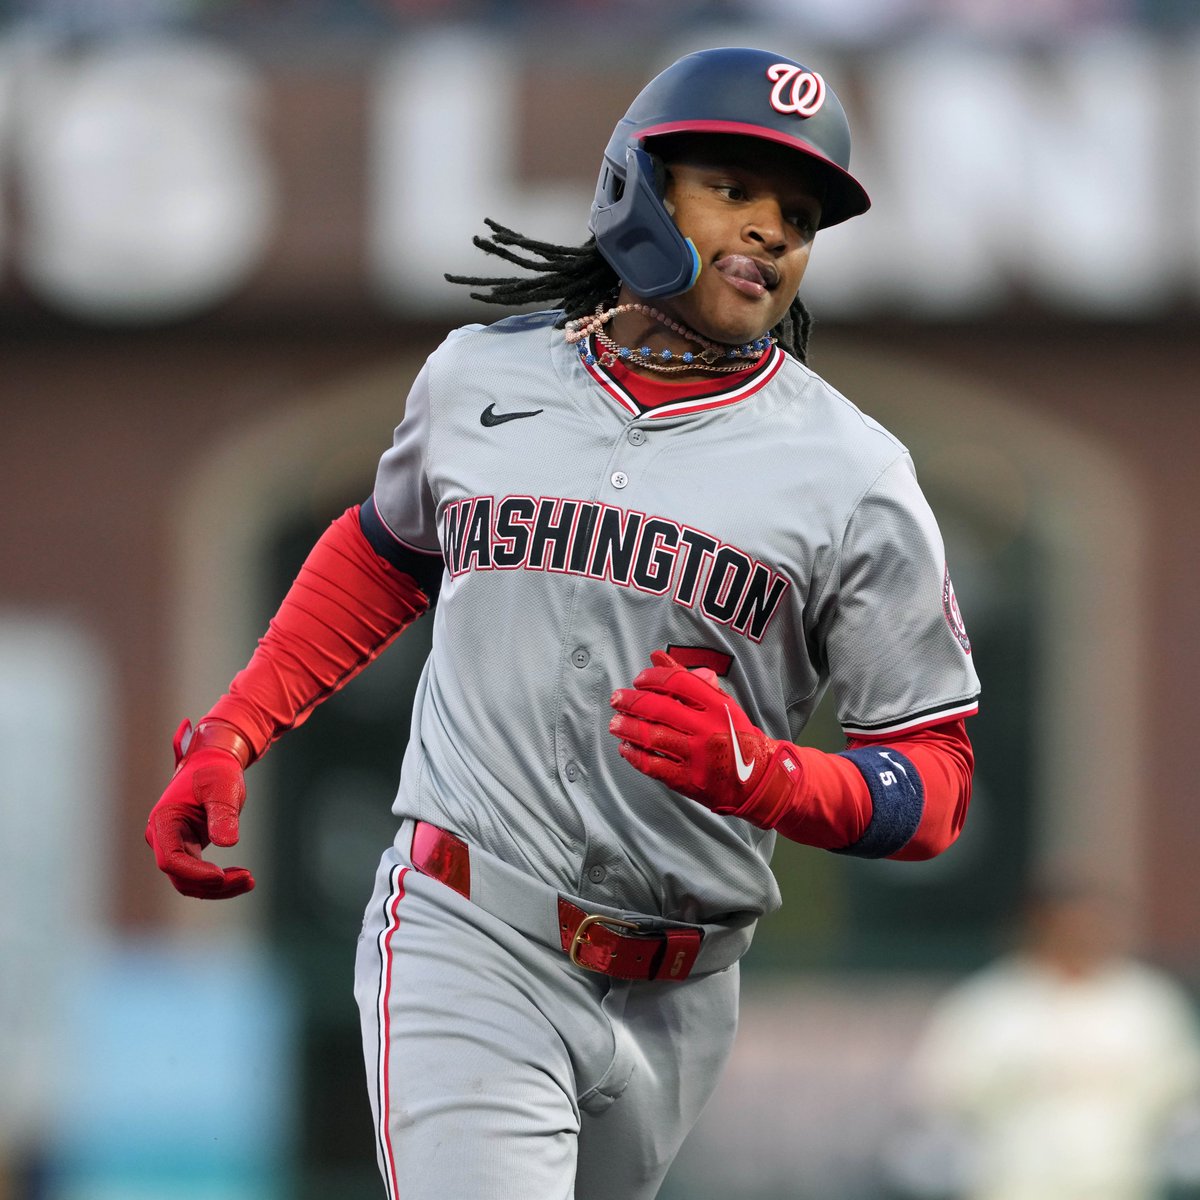 CJ Abrams is the first player in MLB history with 7+ home runs, 6+ steals, and 4+ triples in 25 games to start a season 🔥

#MLB ⎹ #NATITUDE